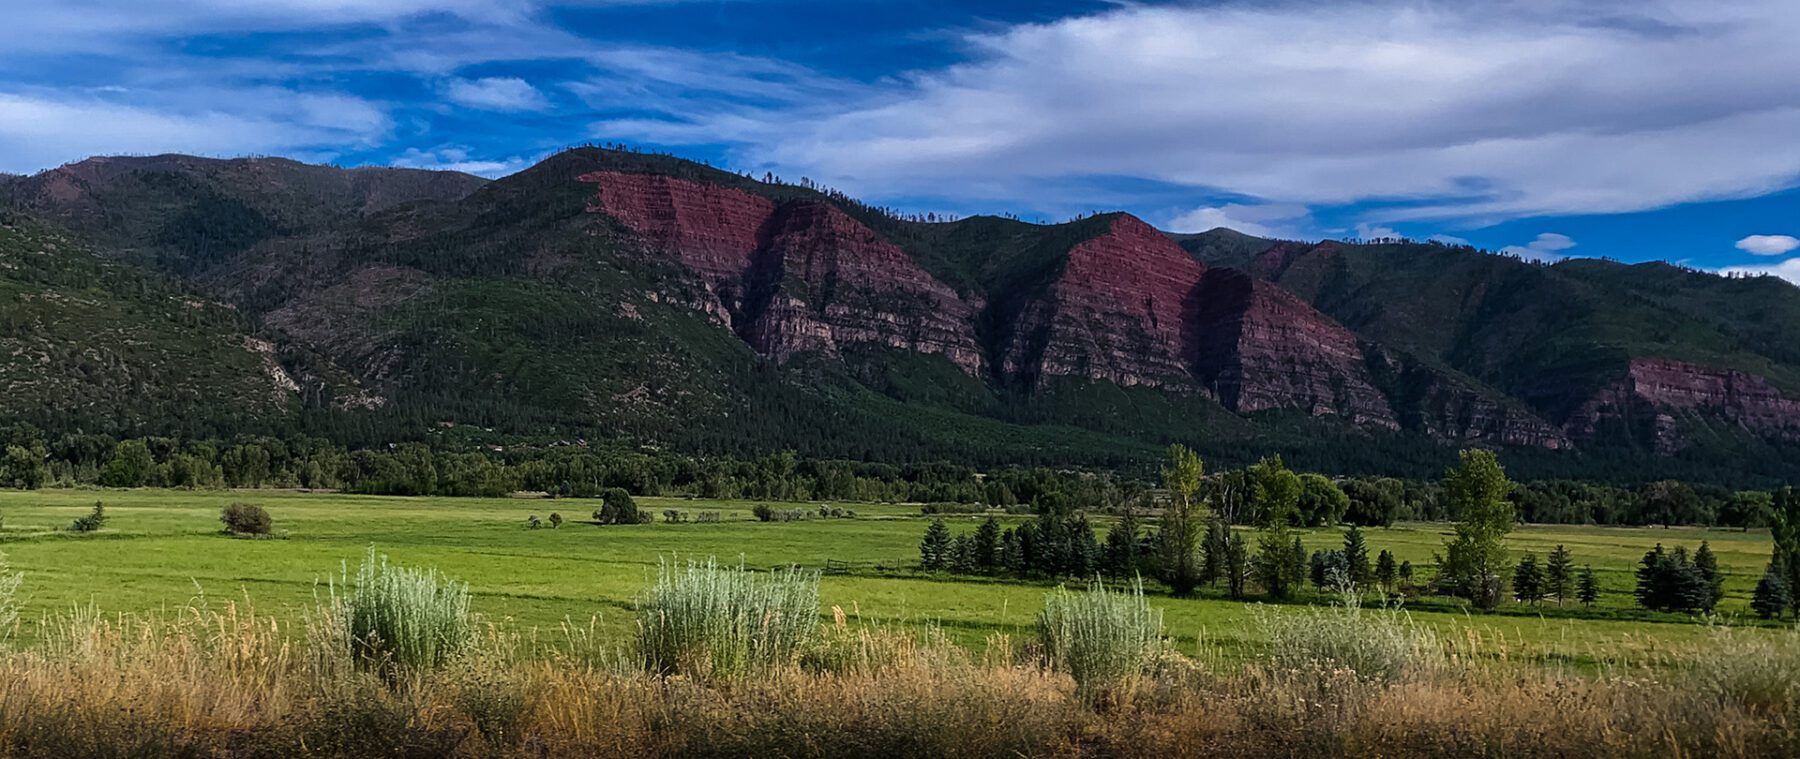 A red mountain range with grass and trees in the background.